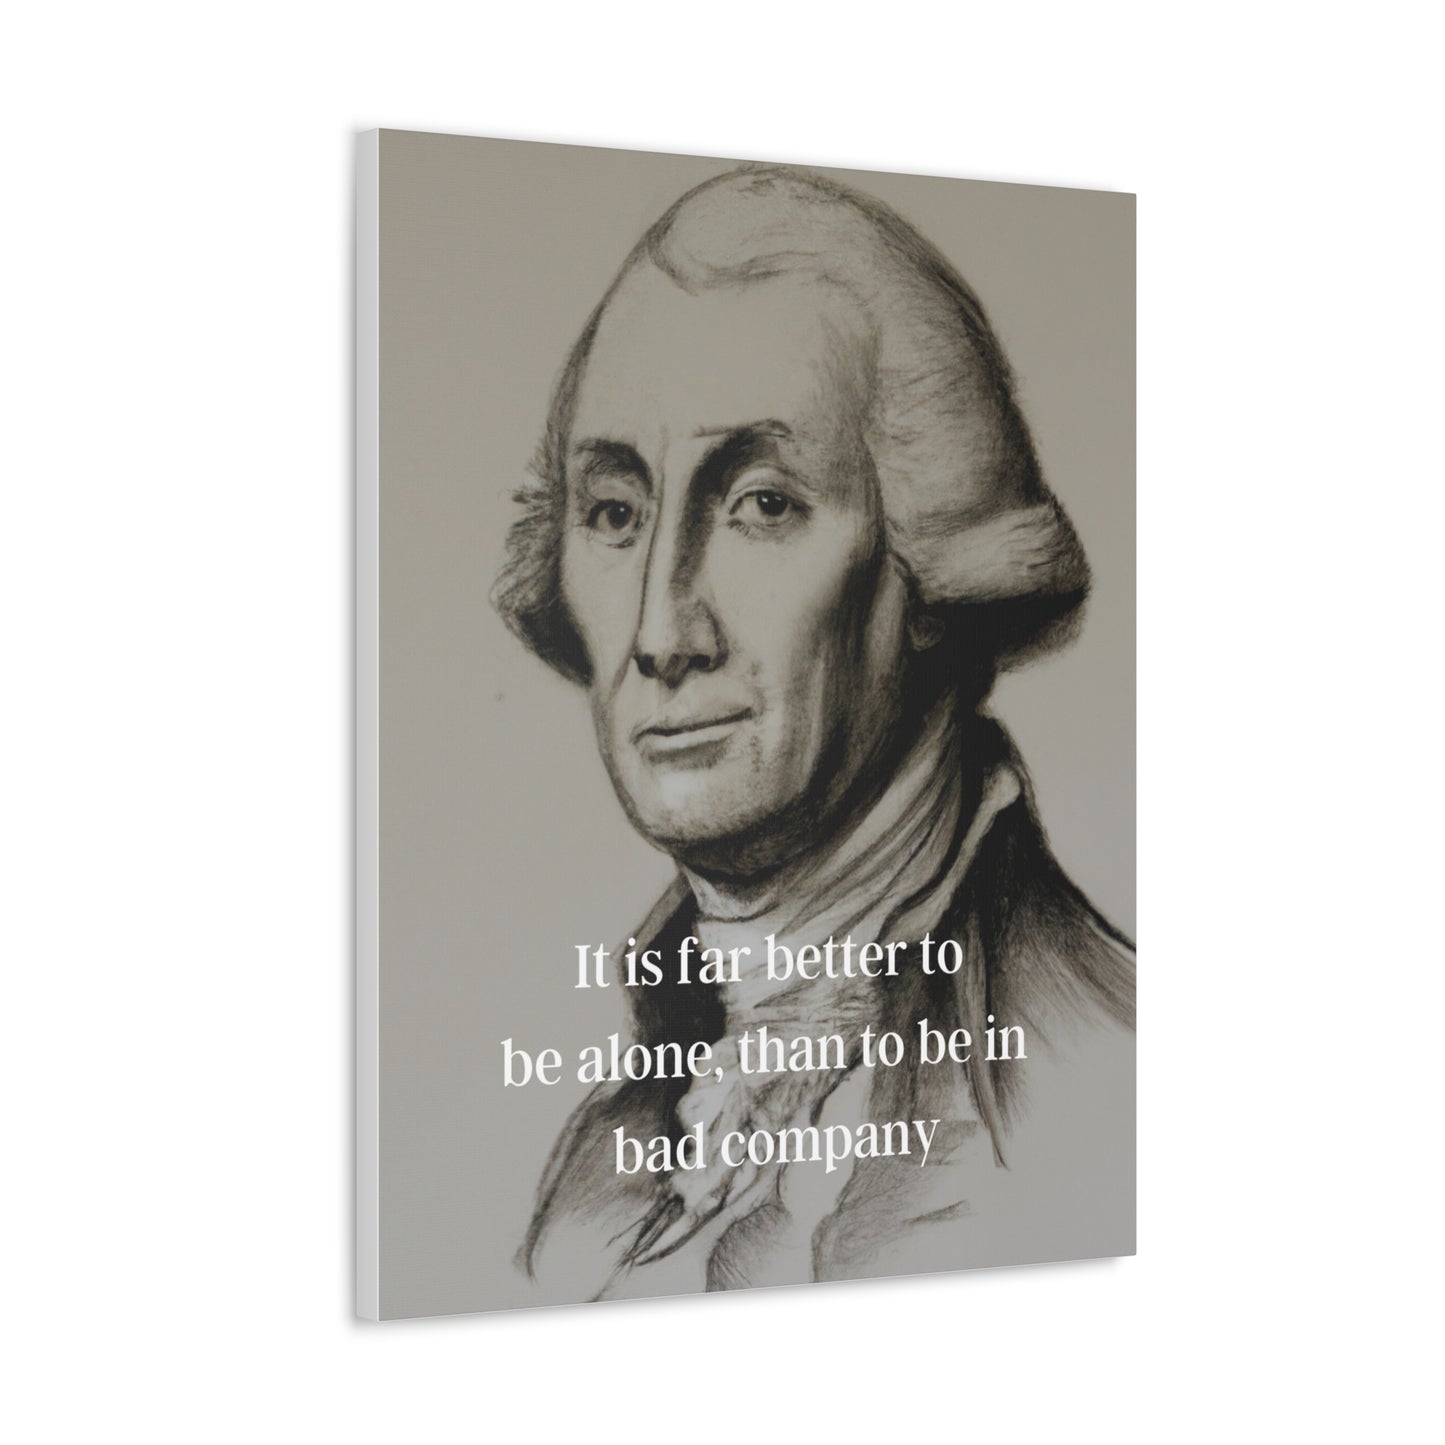 George Washington Quote 1, AI Canvas Art, Neutral Toned Portrait #2, 1st President of the United States, American Patriots, AI Art, Political Art, Canvas Prints, Presidential Portraits, Presidential Quotes, Inspirational Quotes